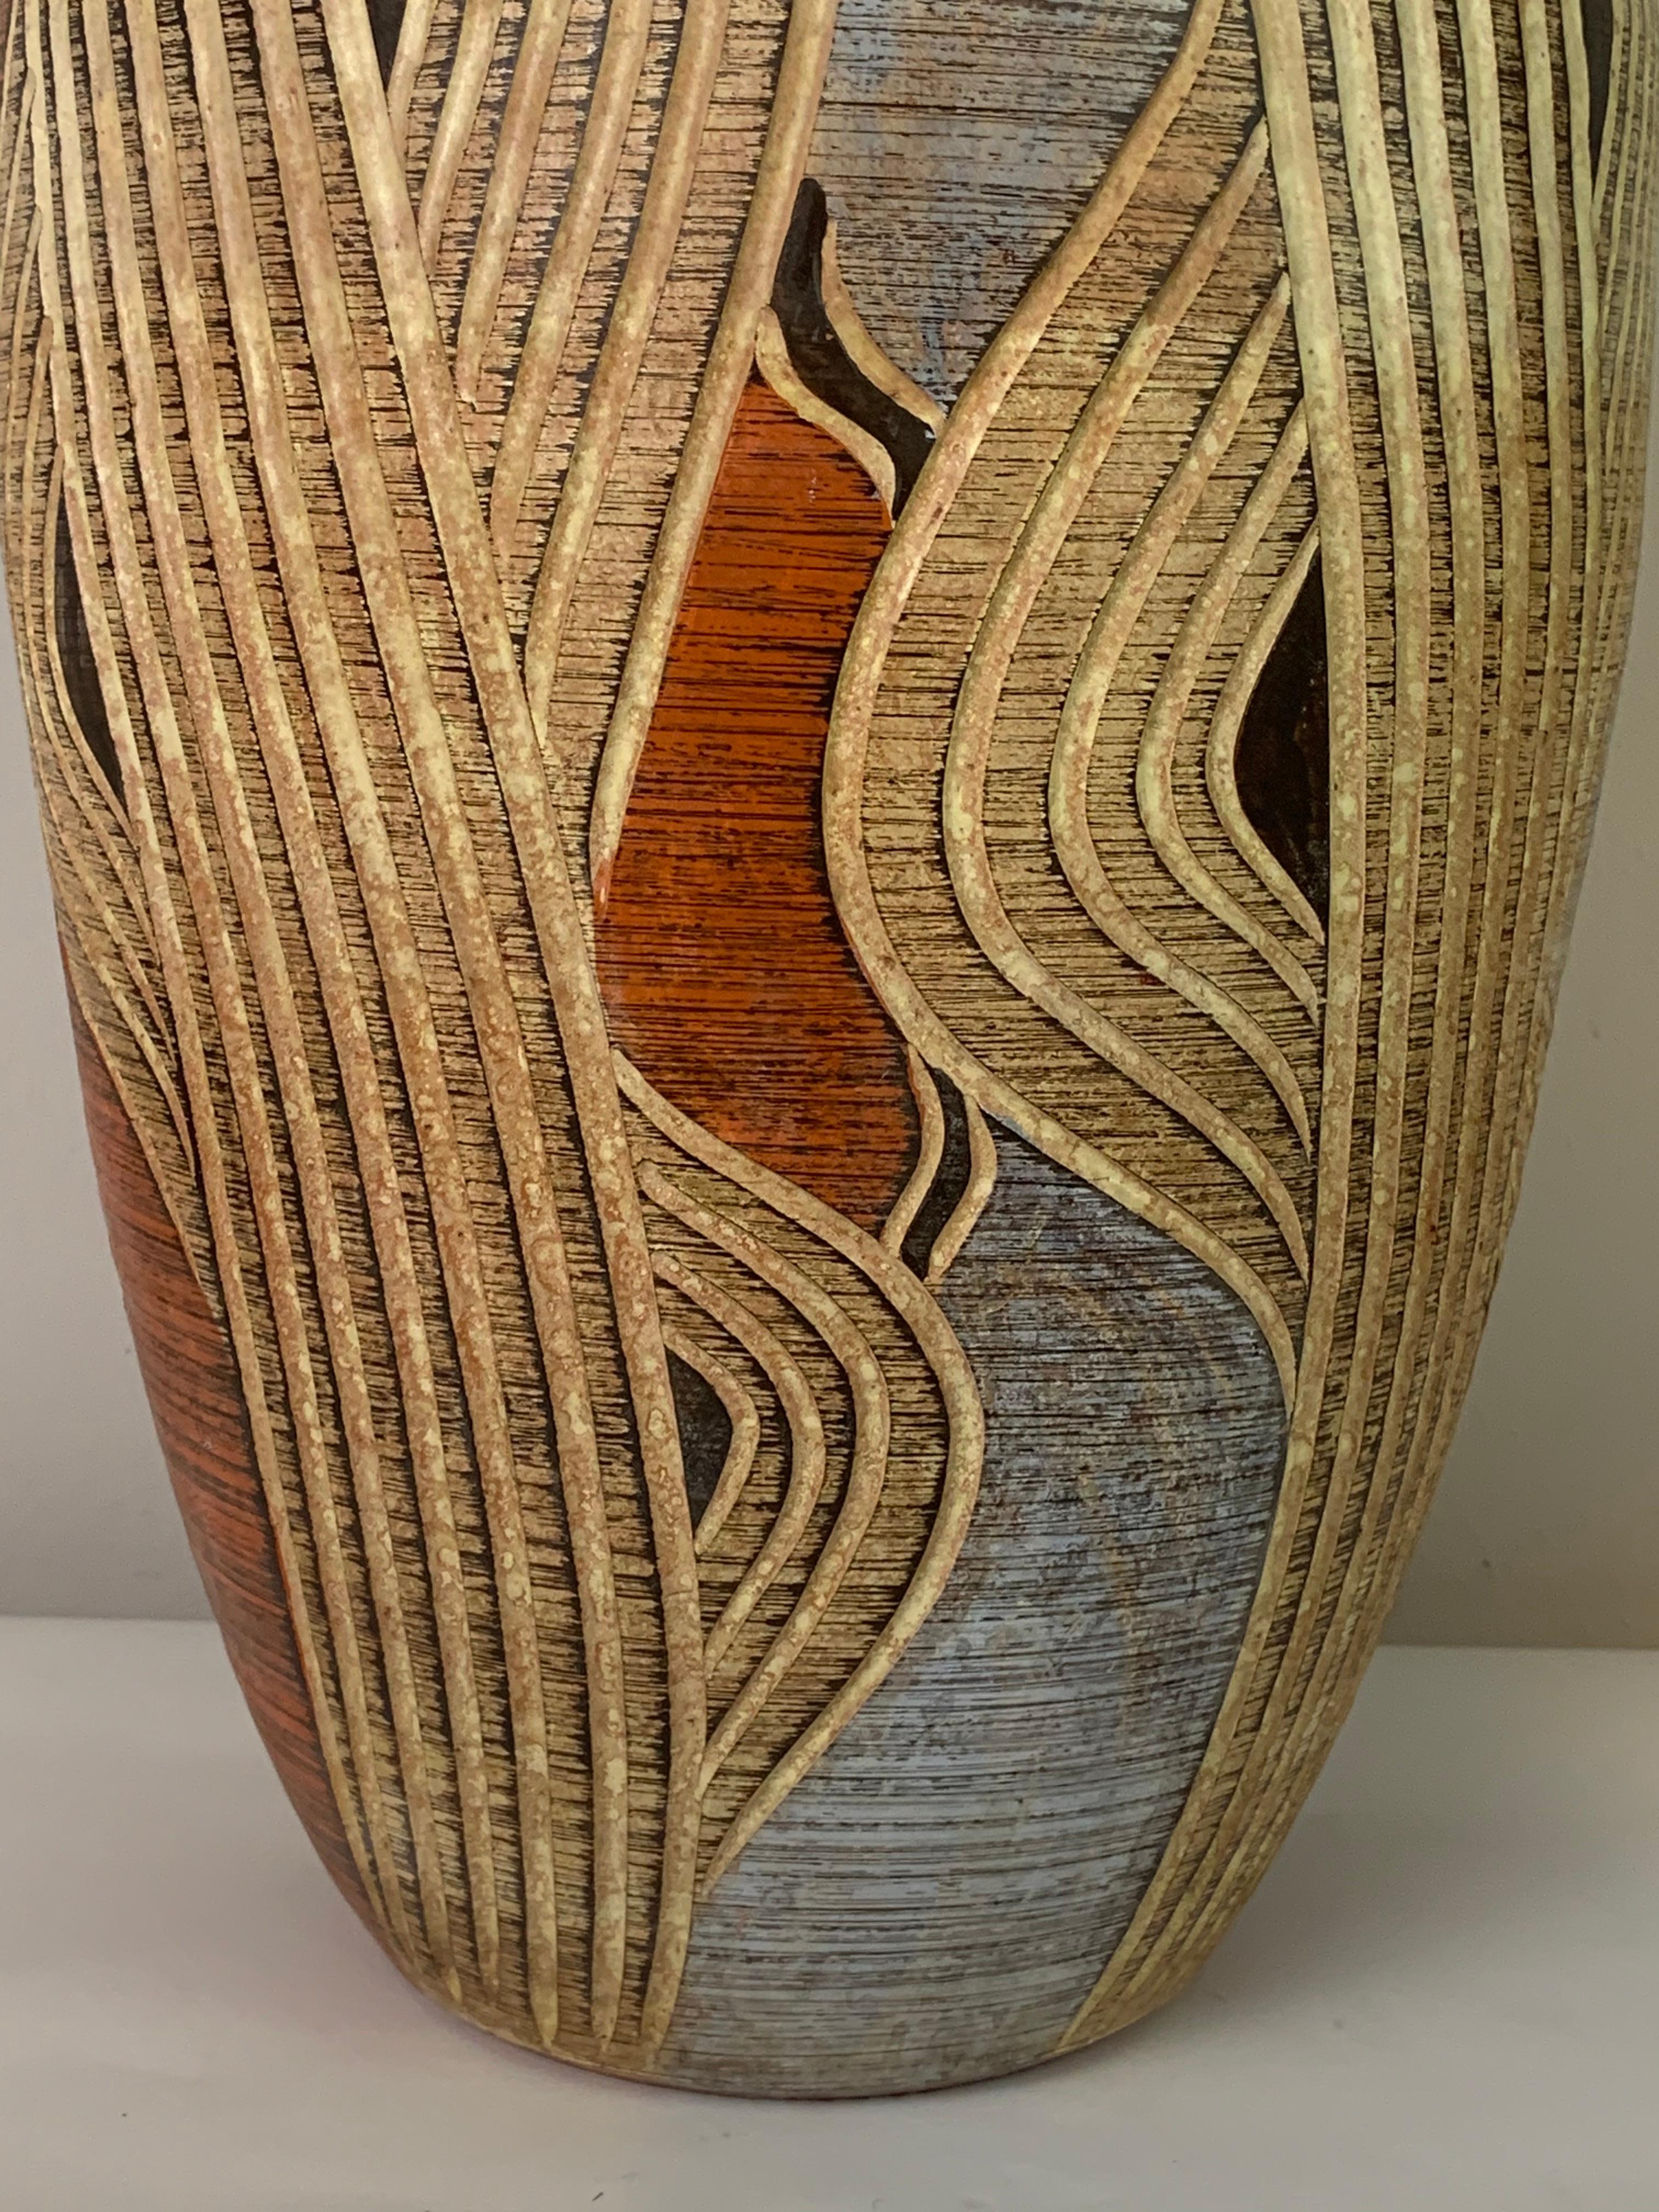 Large vintage pottery ceramic floor vase designed by Franz Schwaderlapp and produced by Sawa Ceramic in Germany during the 1960s. The vase is inscribed on the clay base 